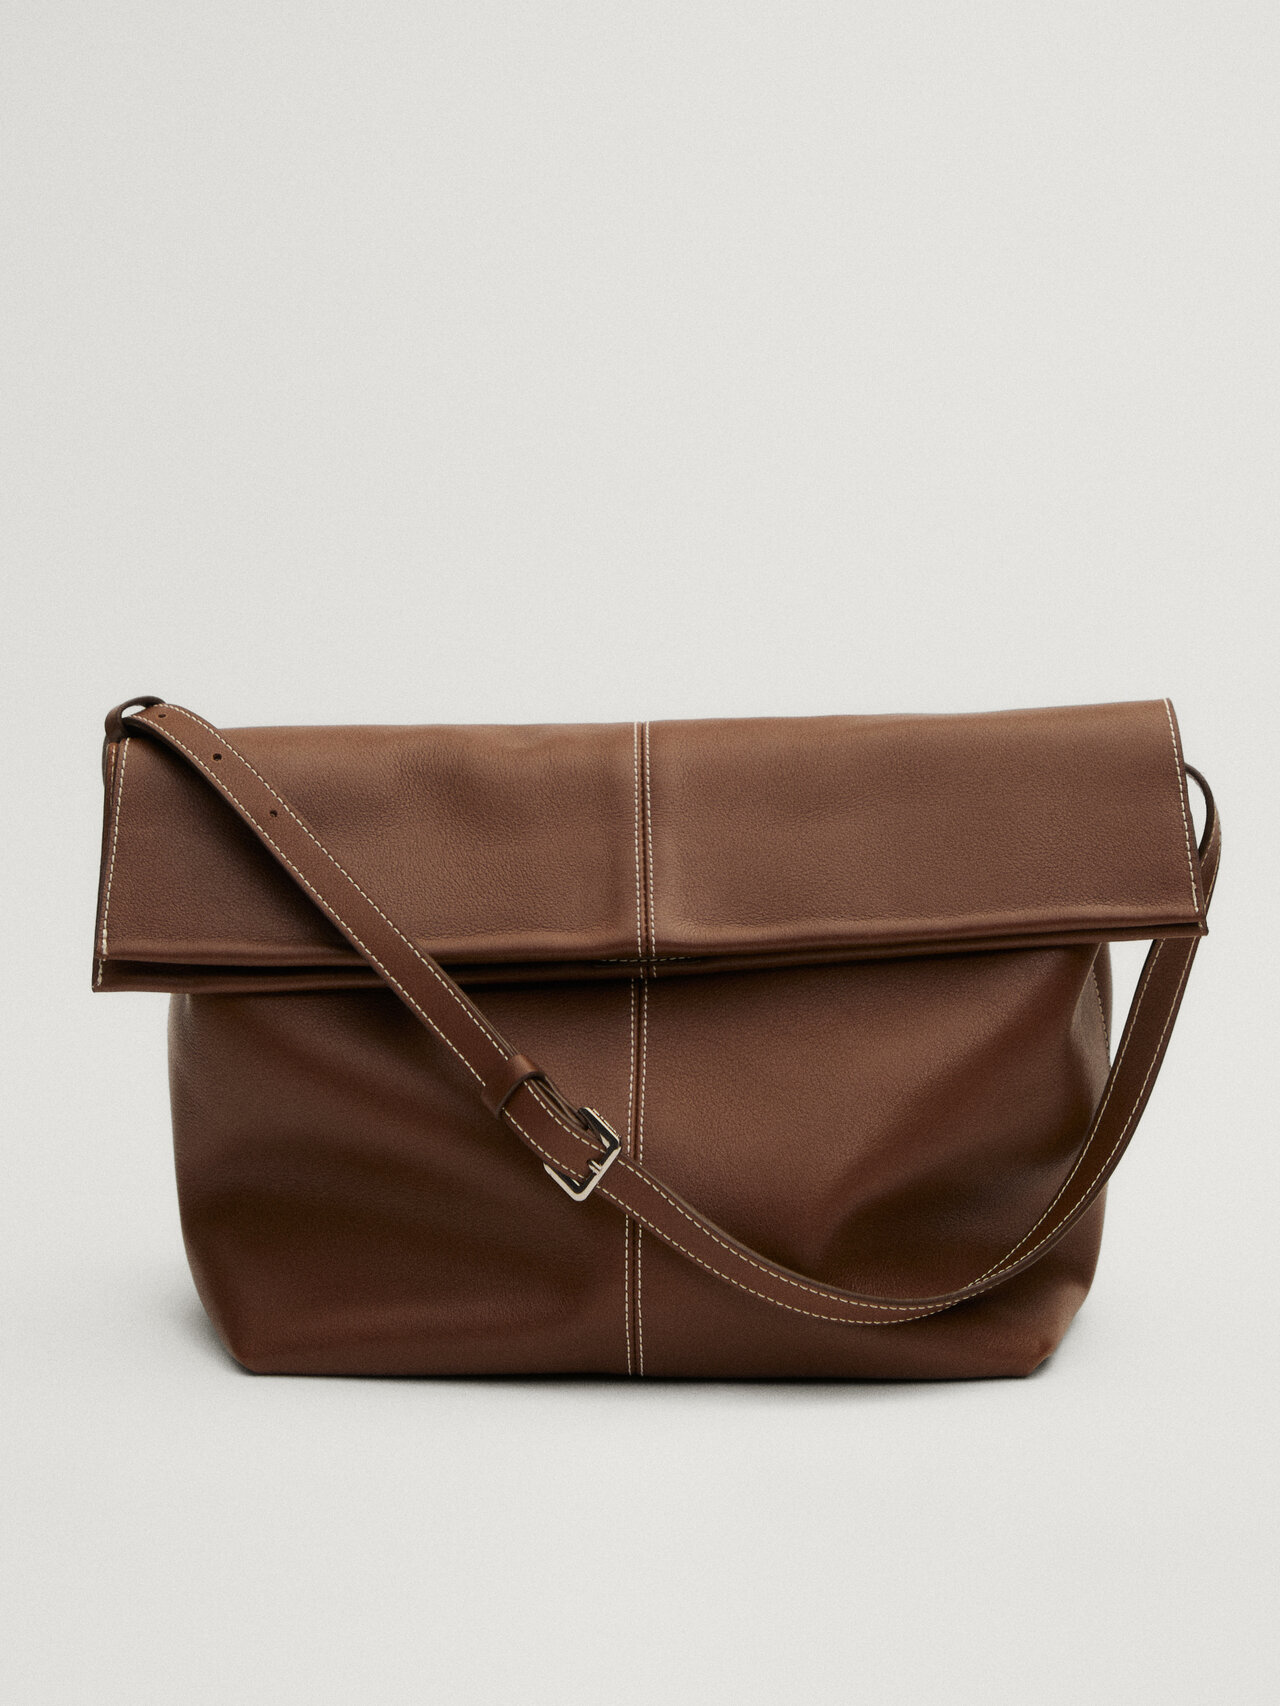 Nappa leather bag with adjustable strap